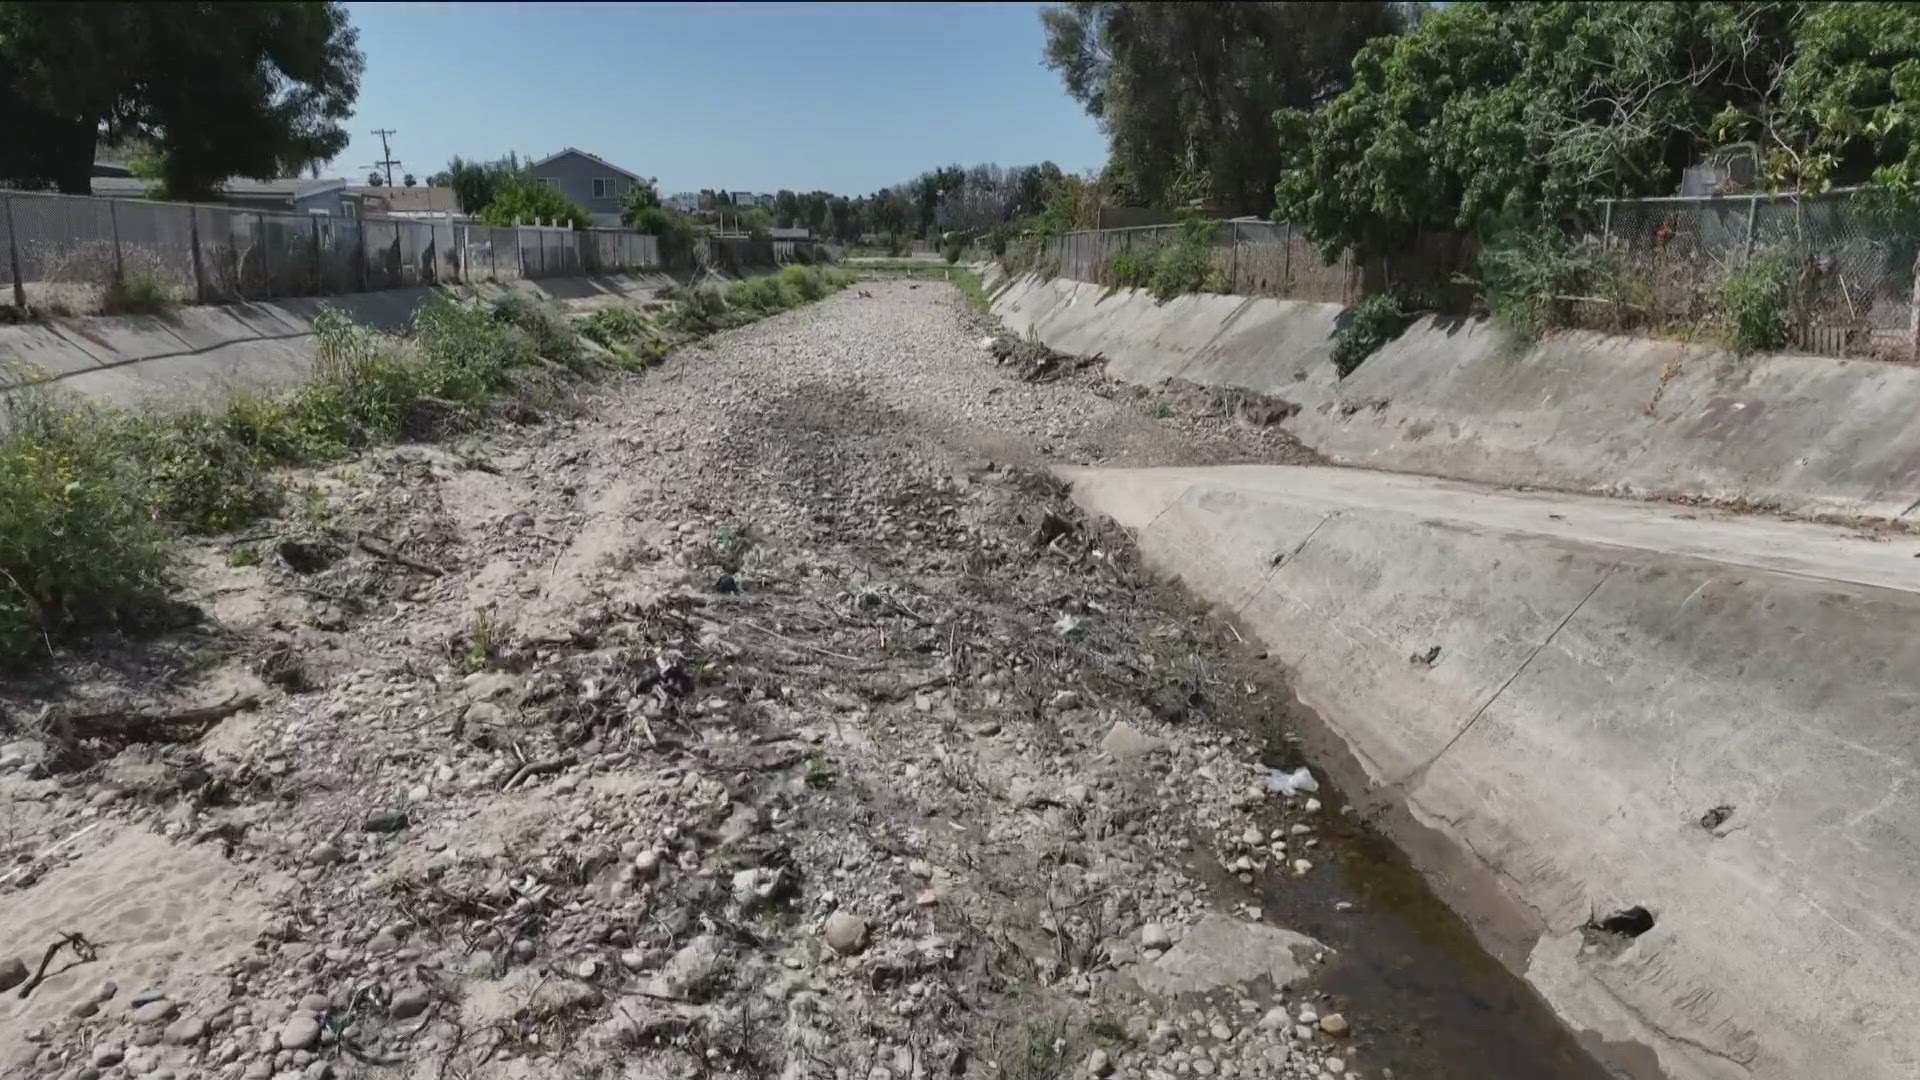 A city spokesperson said they will conduct repeat maintenance on all 18 miles of channels in the Chollas Creek Watershed.